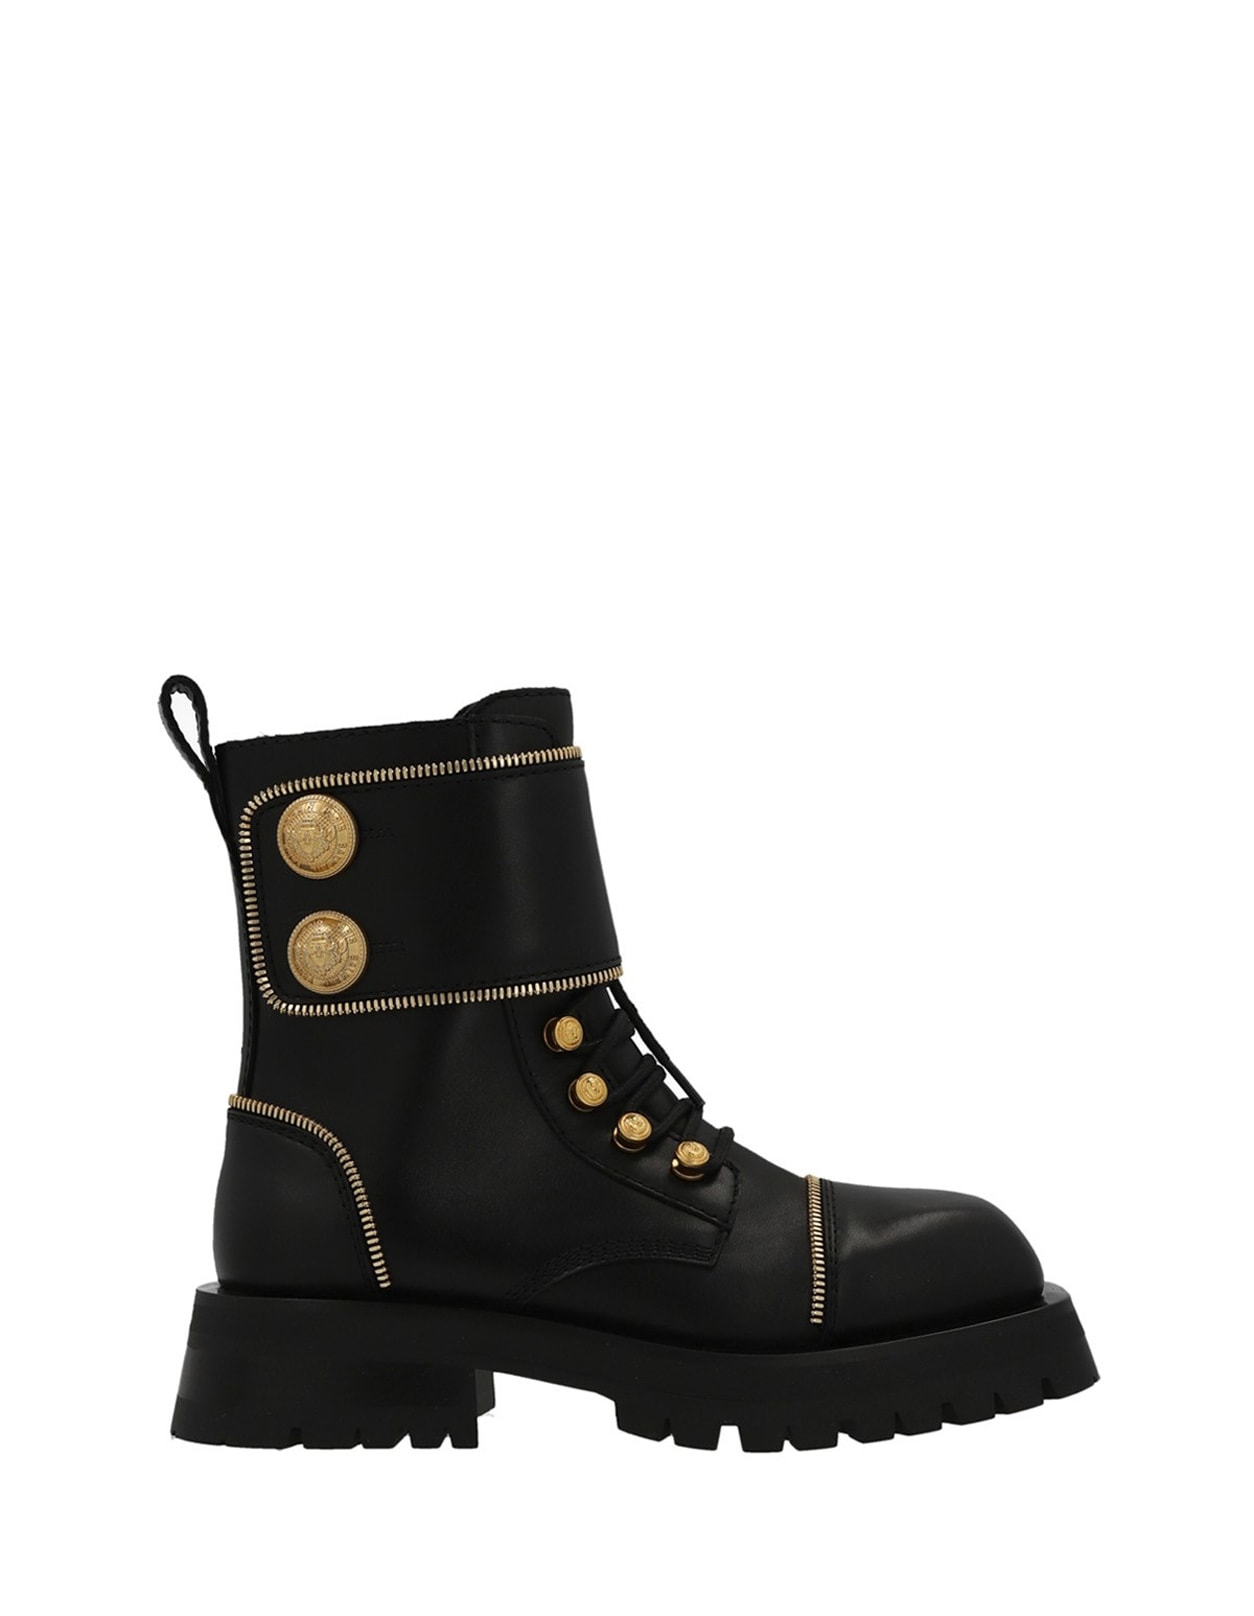 BALMAIN RANGER ARMY ANKLE BOOTS IN BLACK LEATHER